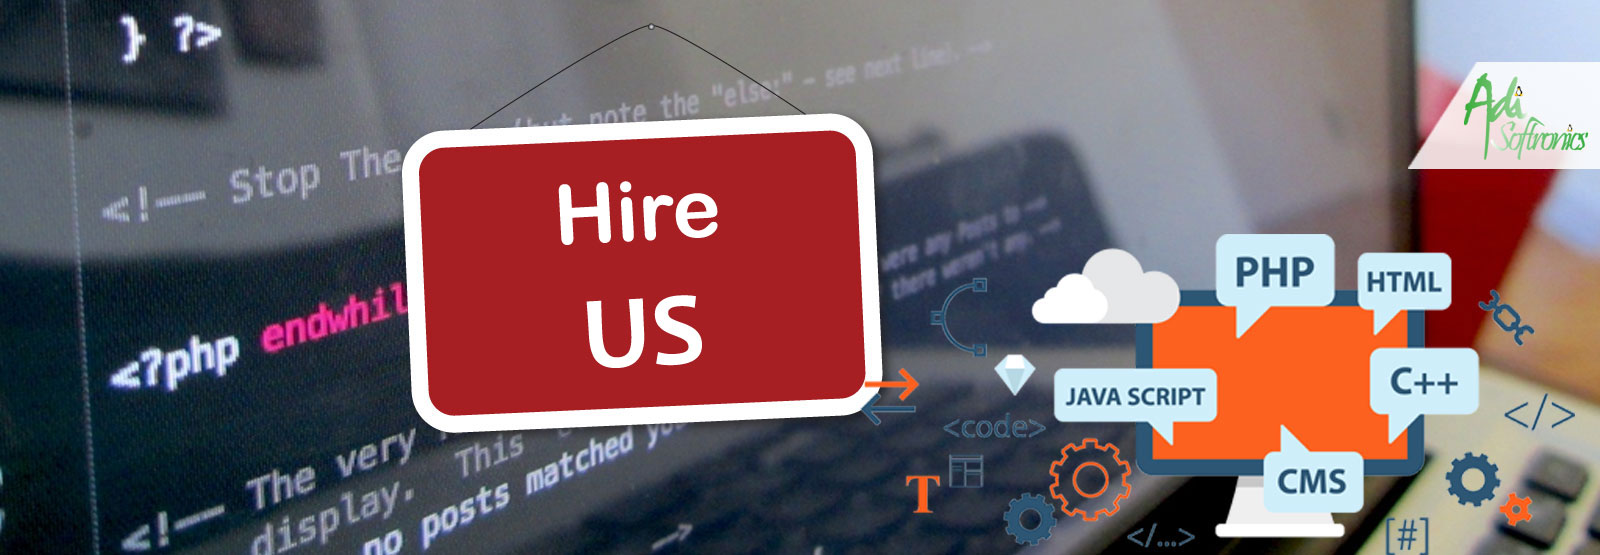 Hire dedicated php developer on hourly basis from Adisoftronics